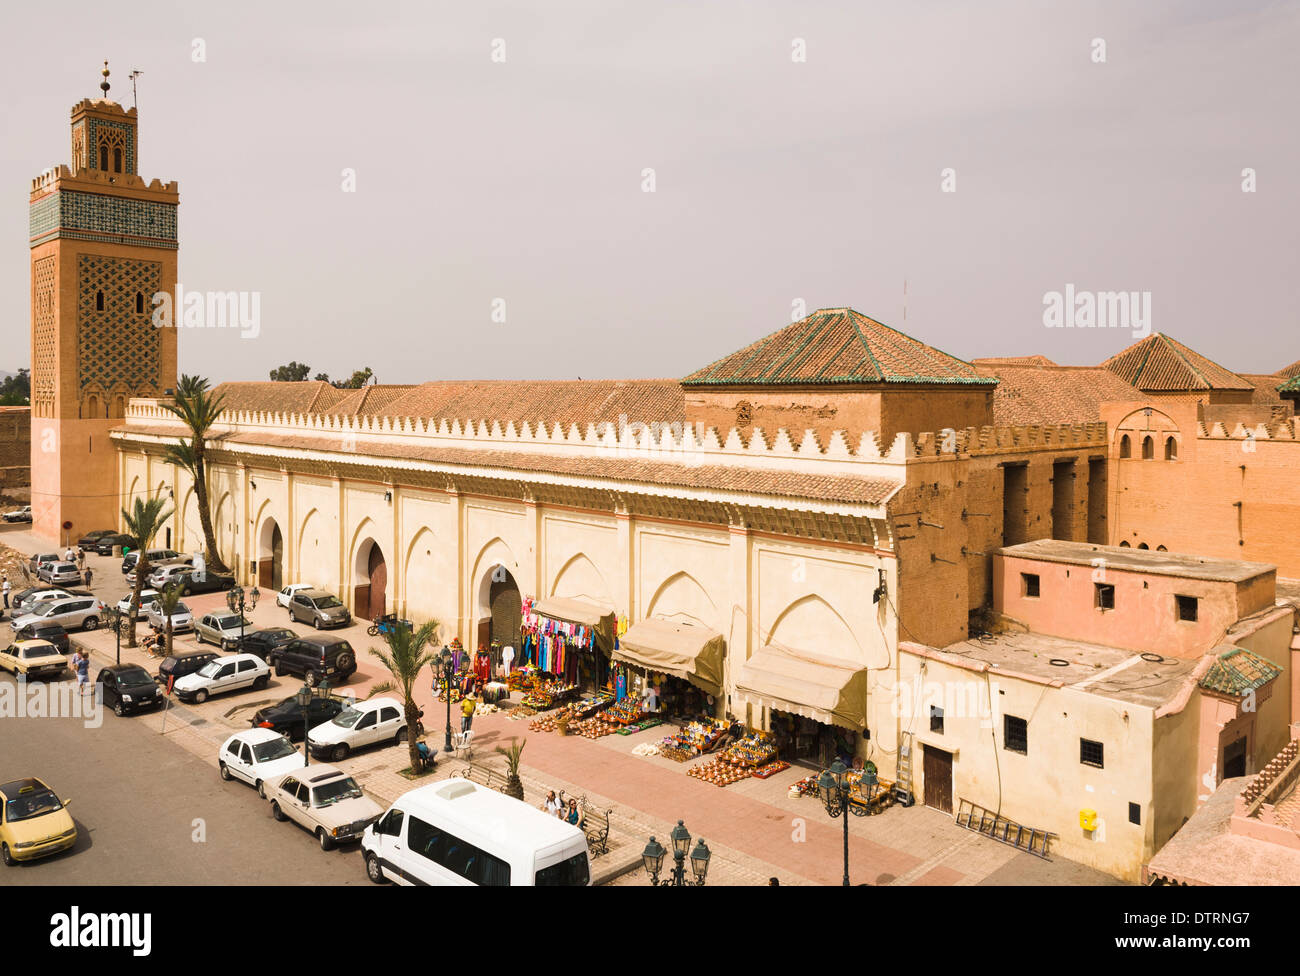 Molay Al Yazid Mosque seen from Cafe Restaurant Nid Cigogne in the Medina of Marrakesh, Morocco. Stock Photo